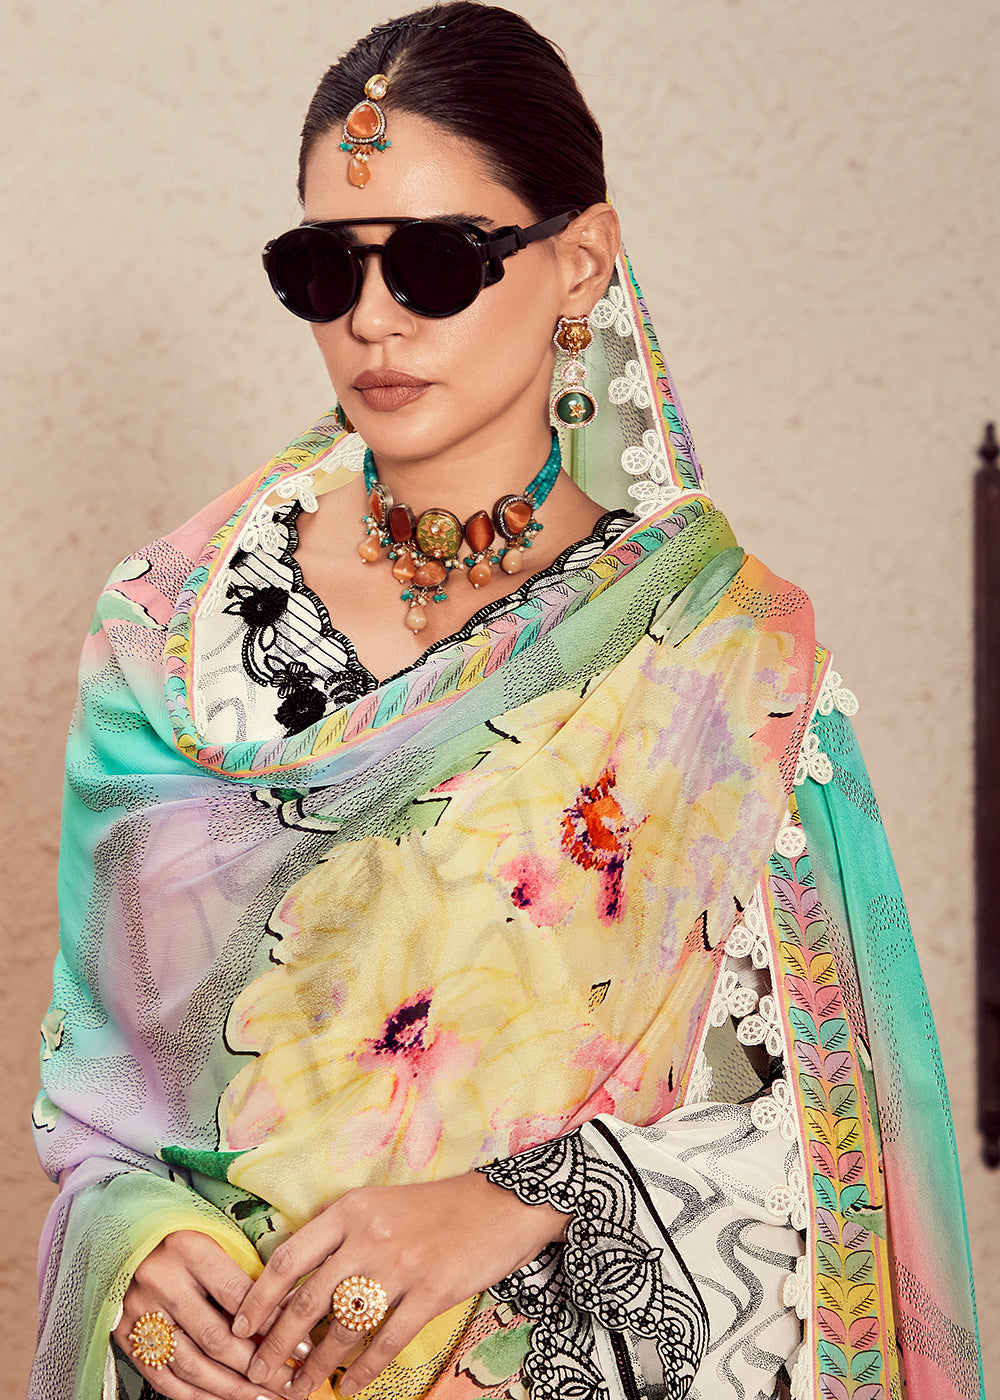 Buy Now Muslin Cotton Off White Digital Print & Embroidered Salwar Suit Online in USA, UK, Canada, Germany, Australia & Worldwide at Empress Clothing.